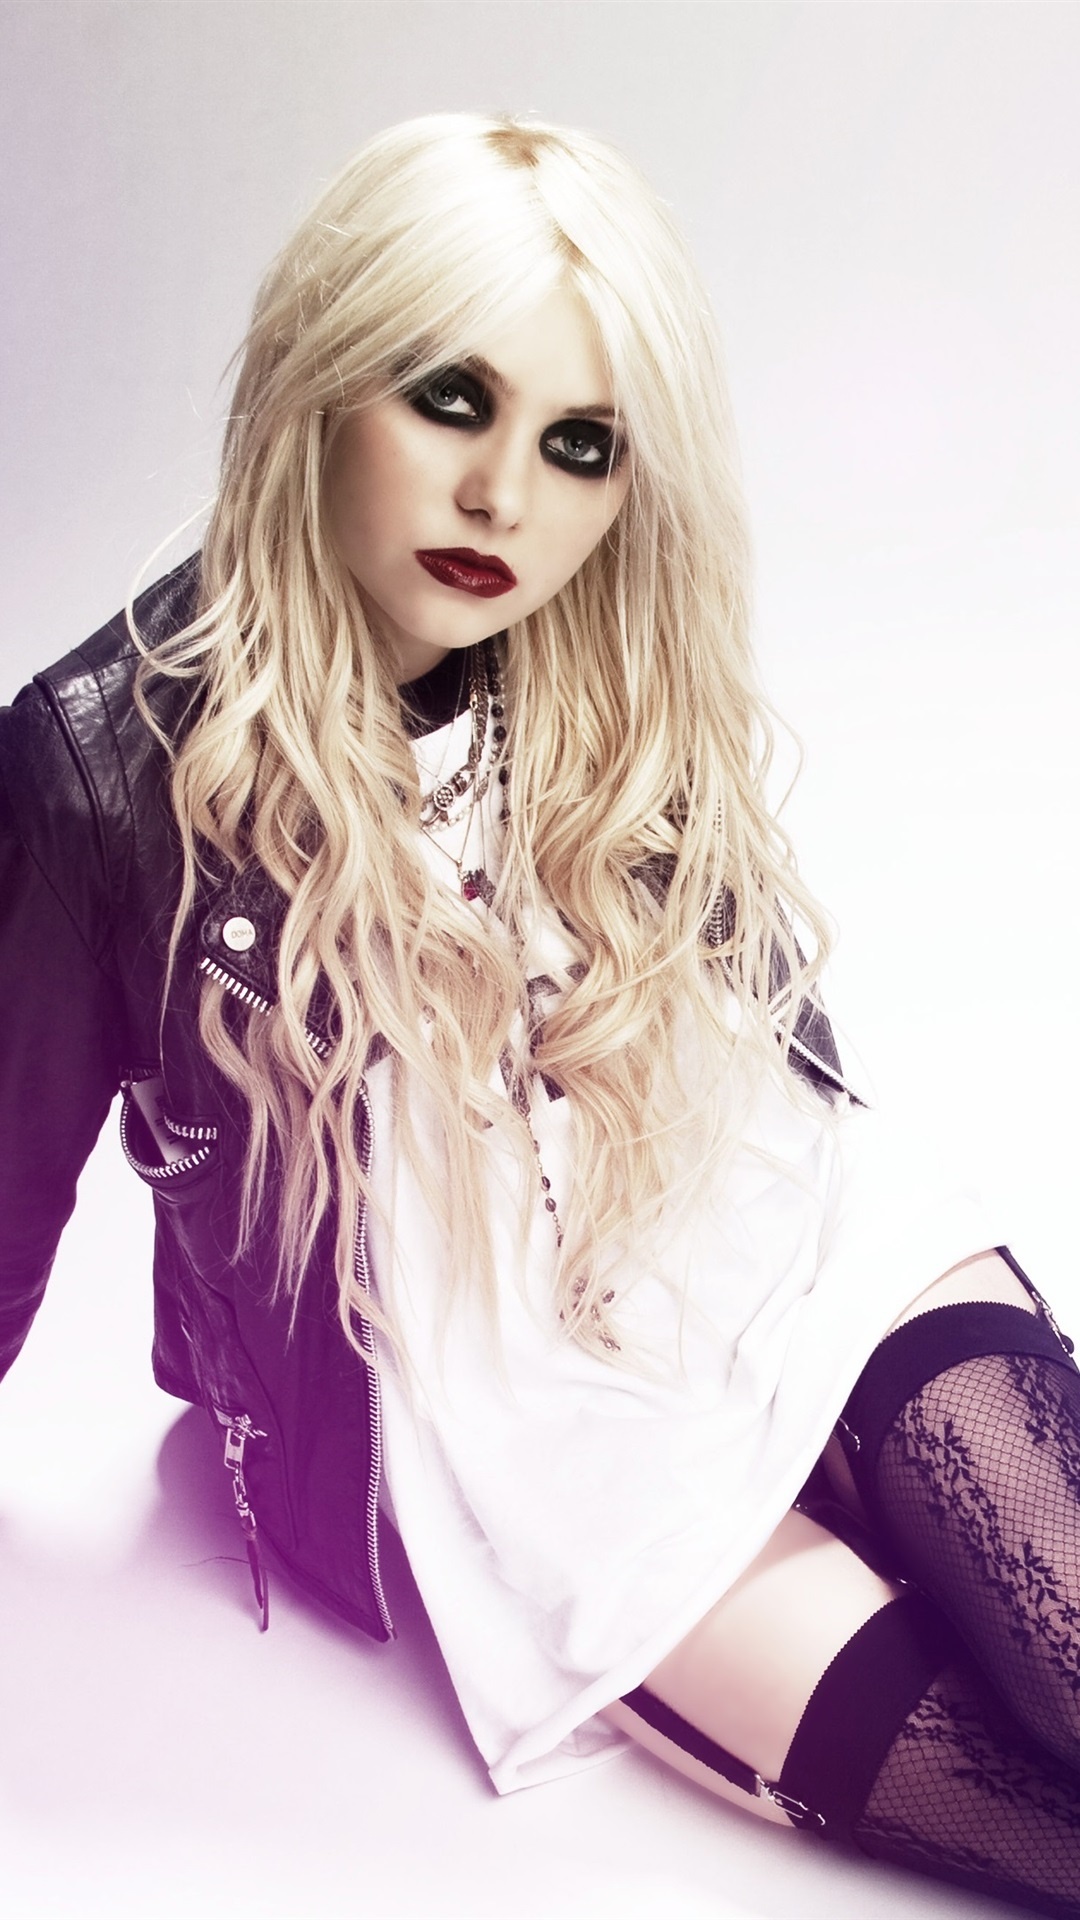 Taylor Momsen phone wallpapers, Ryan Sellers, The Pretty Reckless, Taylor Momsen, 1080x1920 Full HD Phone